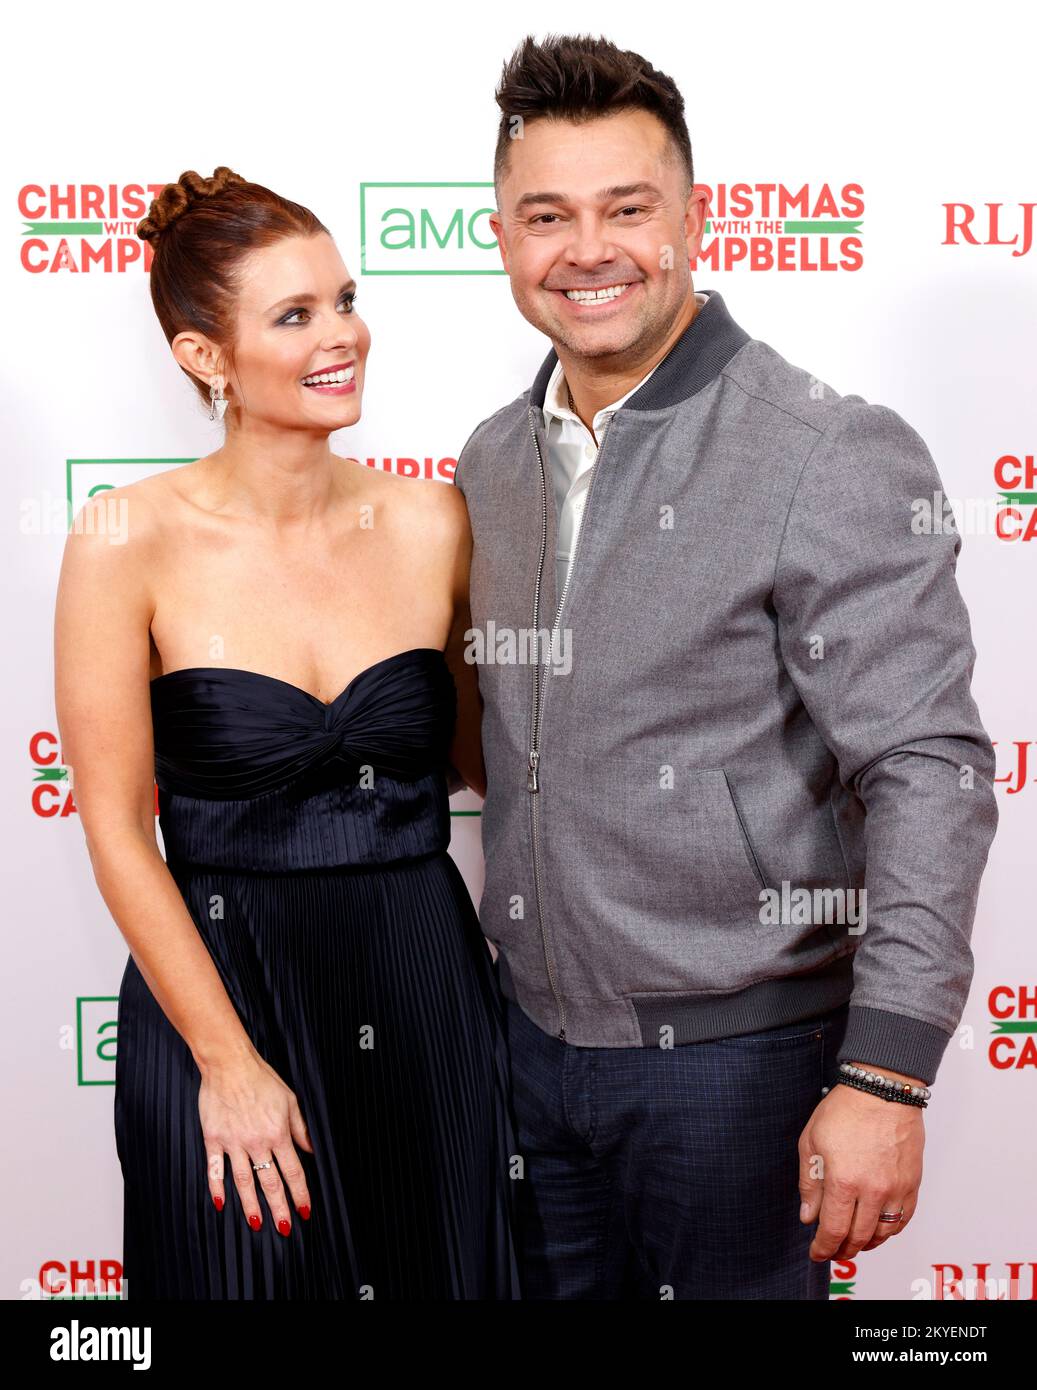 Los Angeles, USA. 30th Nov, 2022. Los Angeles, CA, - Nov 29, 2022: JoAnna Garcia Swisher and Nick Swisher arrive at the movie premiere of 'Christmas With The Campbells' at The Edition West Hollywood Credit: Ovidiu Hrubaru/Alamy Live News Stock Photo